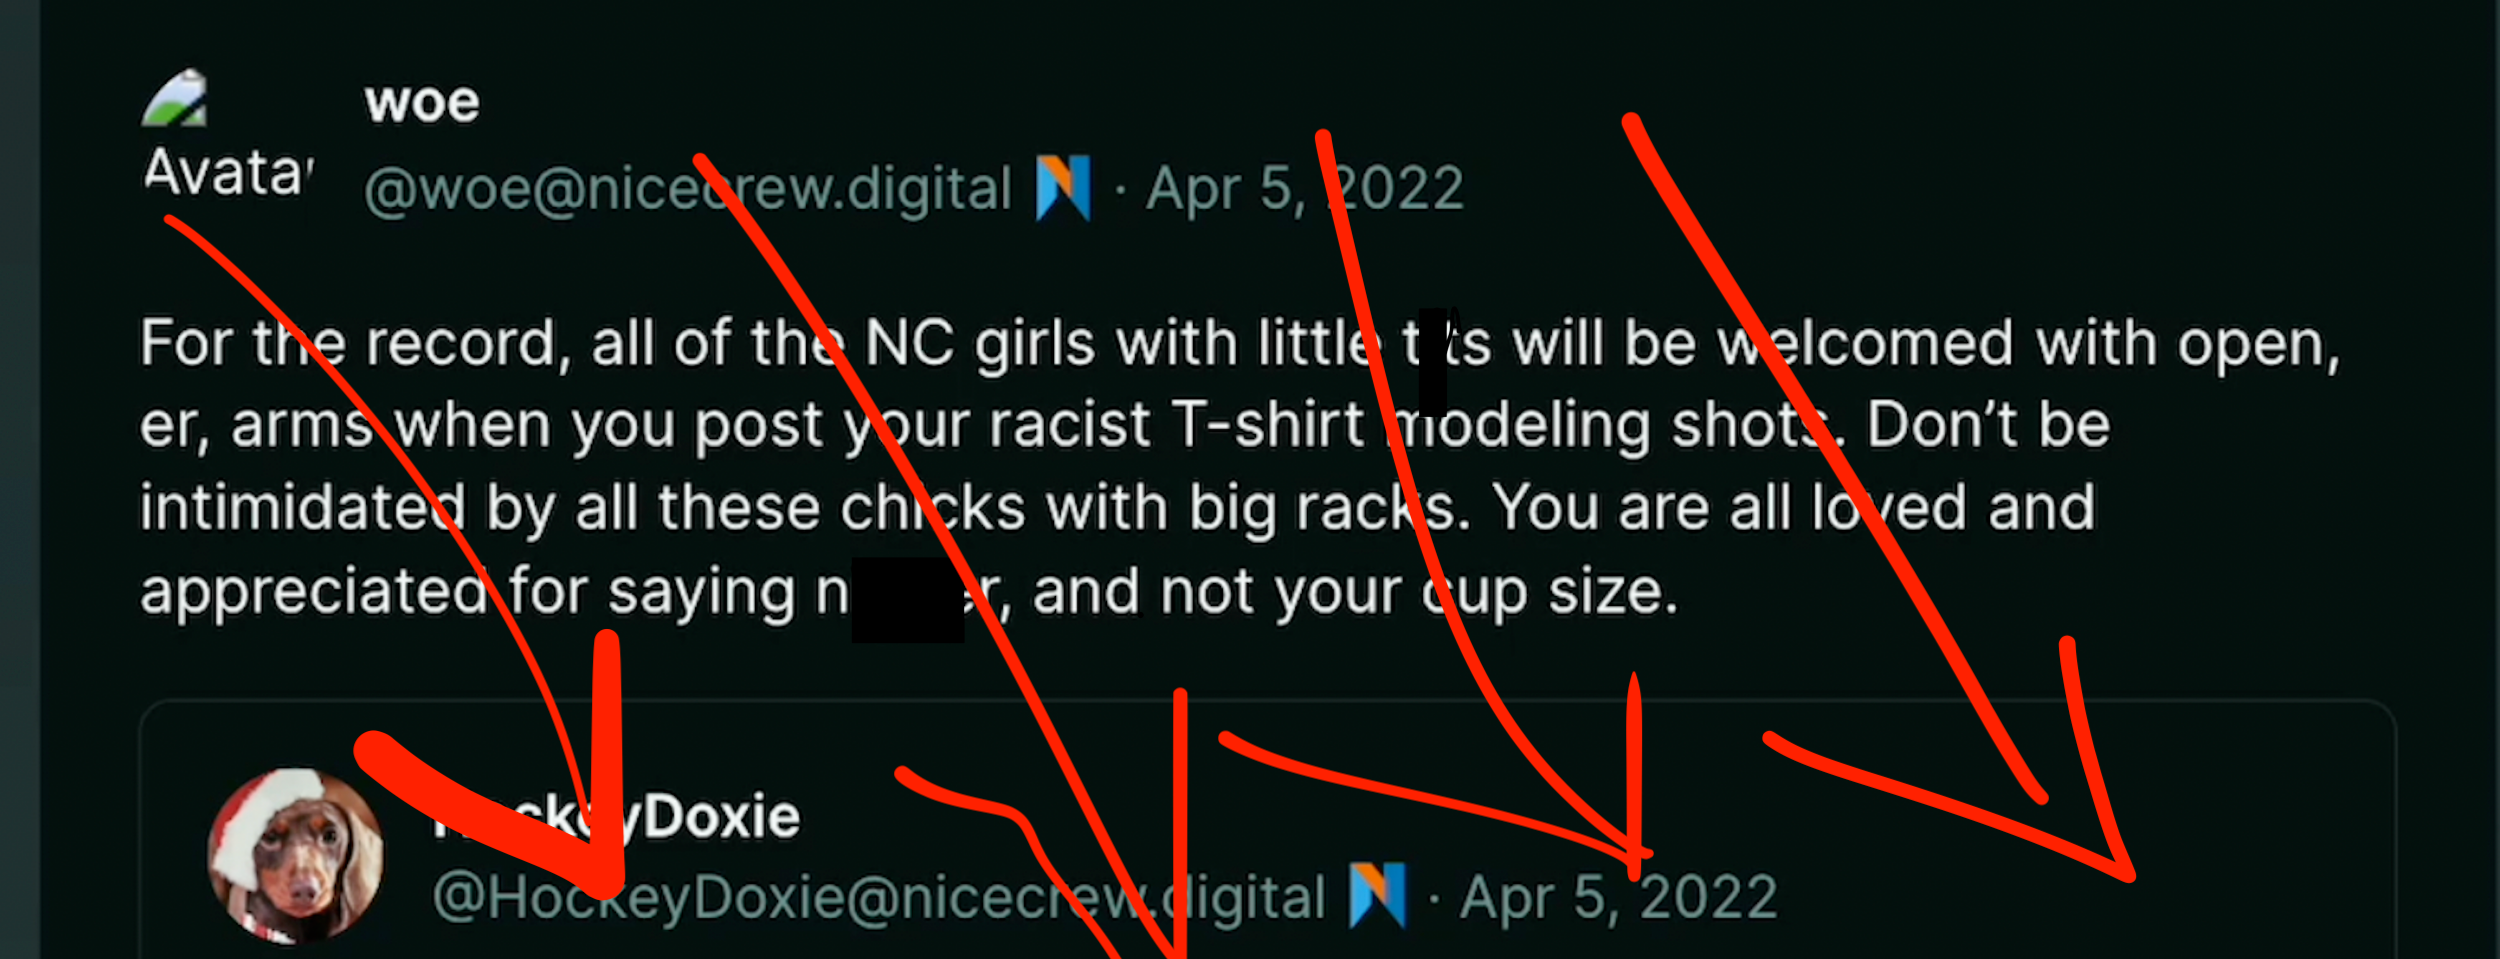 Woe on Poast: "For the record, all you NC (nice crew) girls with little t*ts will be welcomed with open, er, arms when you post your racist T-shirt modeling shts. Don't be intimidated by all these chicks with big racks. You are all loved and appreciated for saying n----r, and not your cup size.